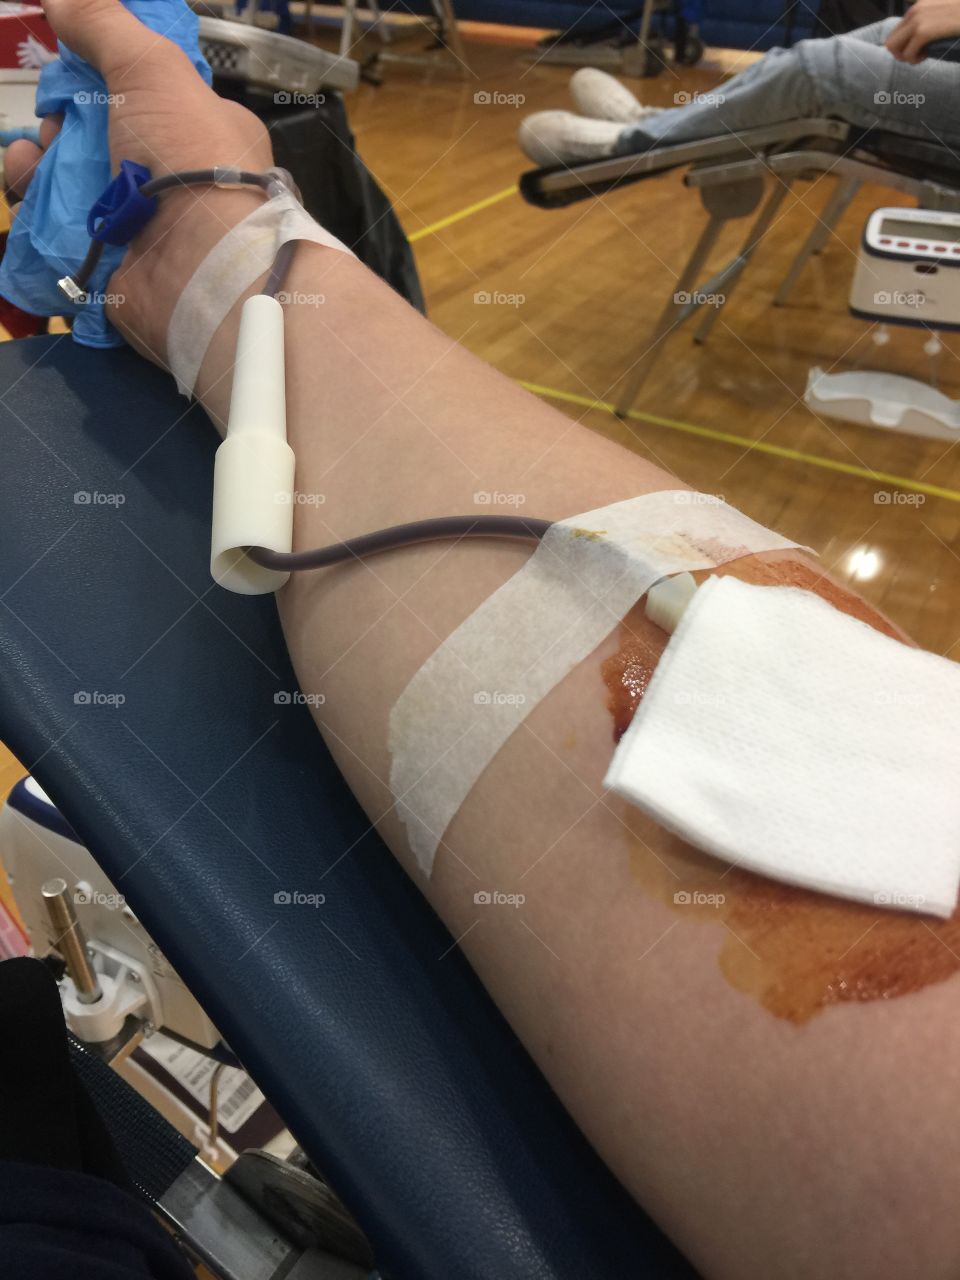 Donating blood saves lives